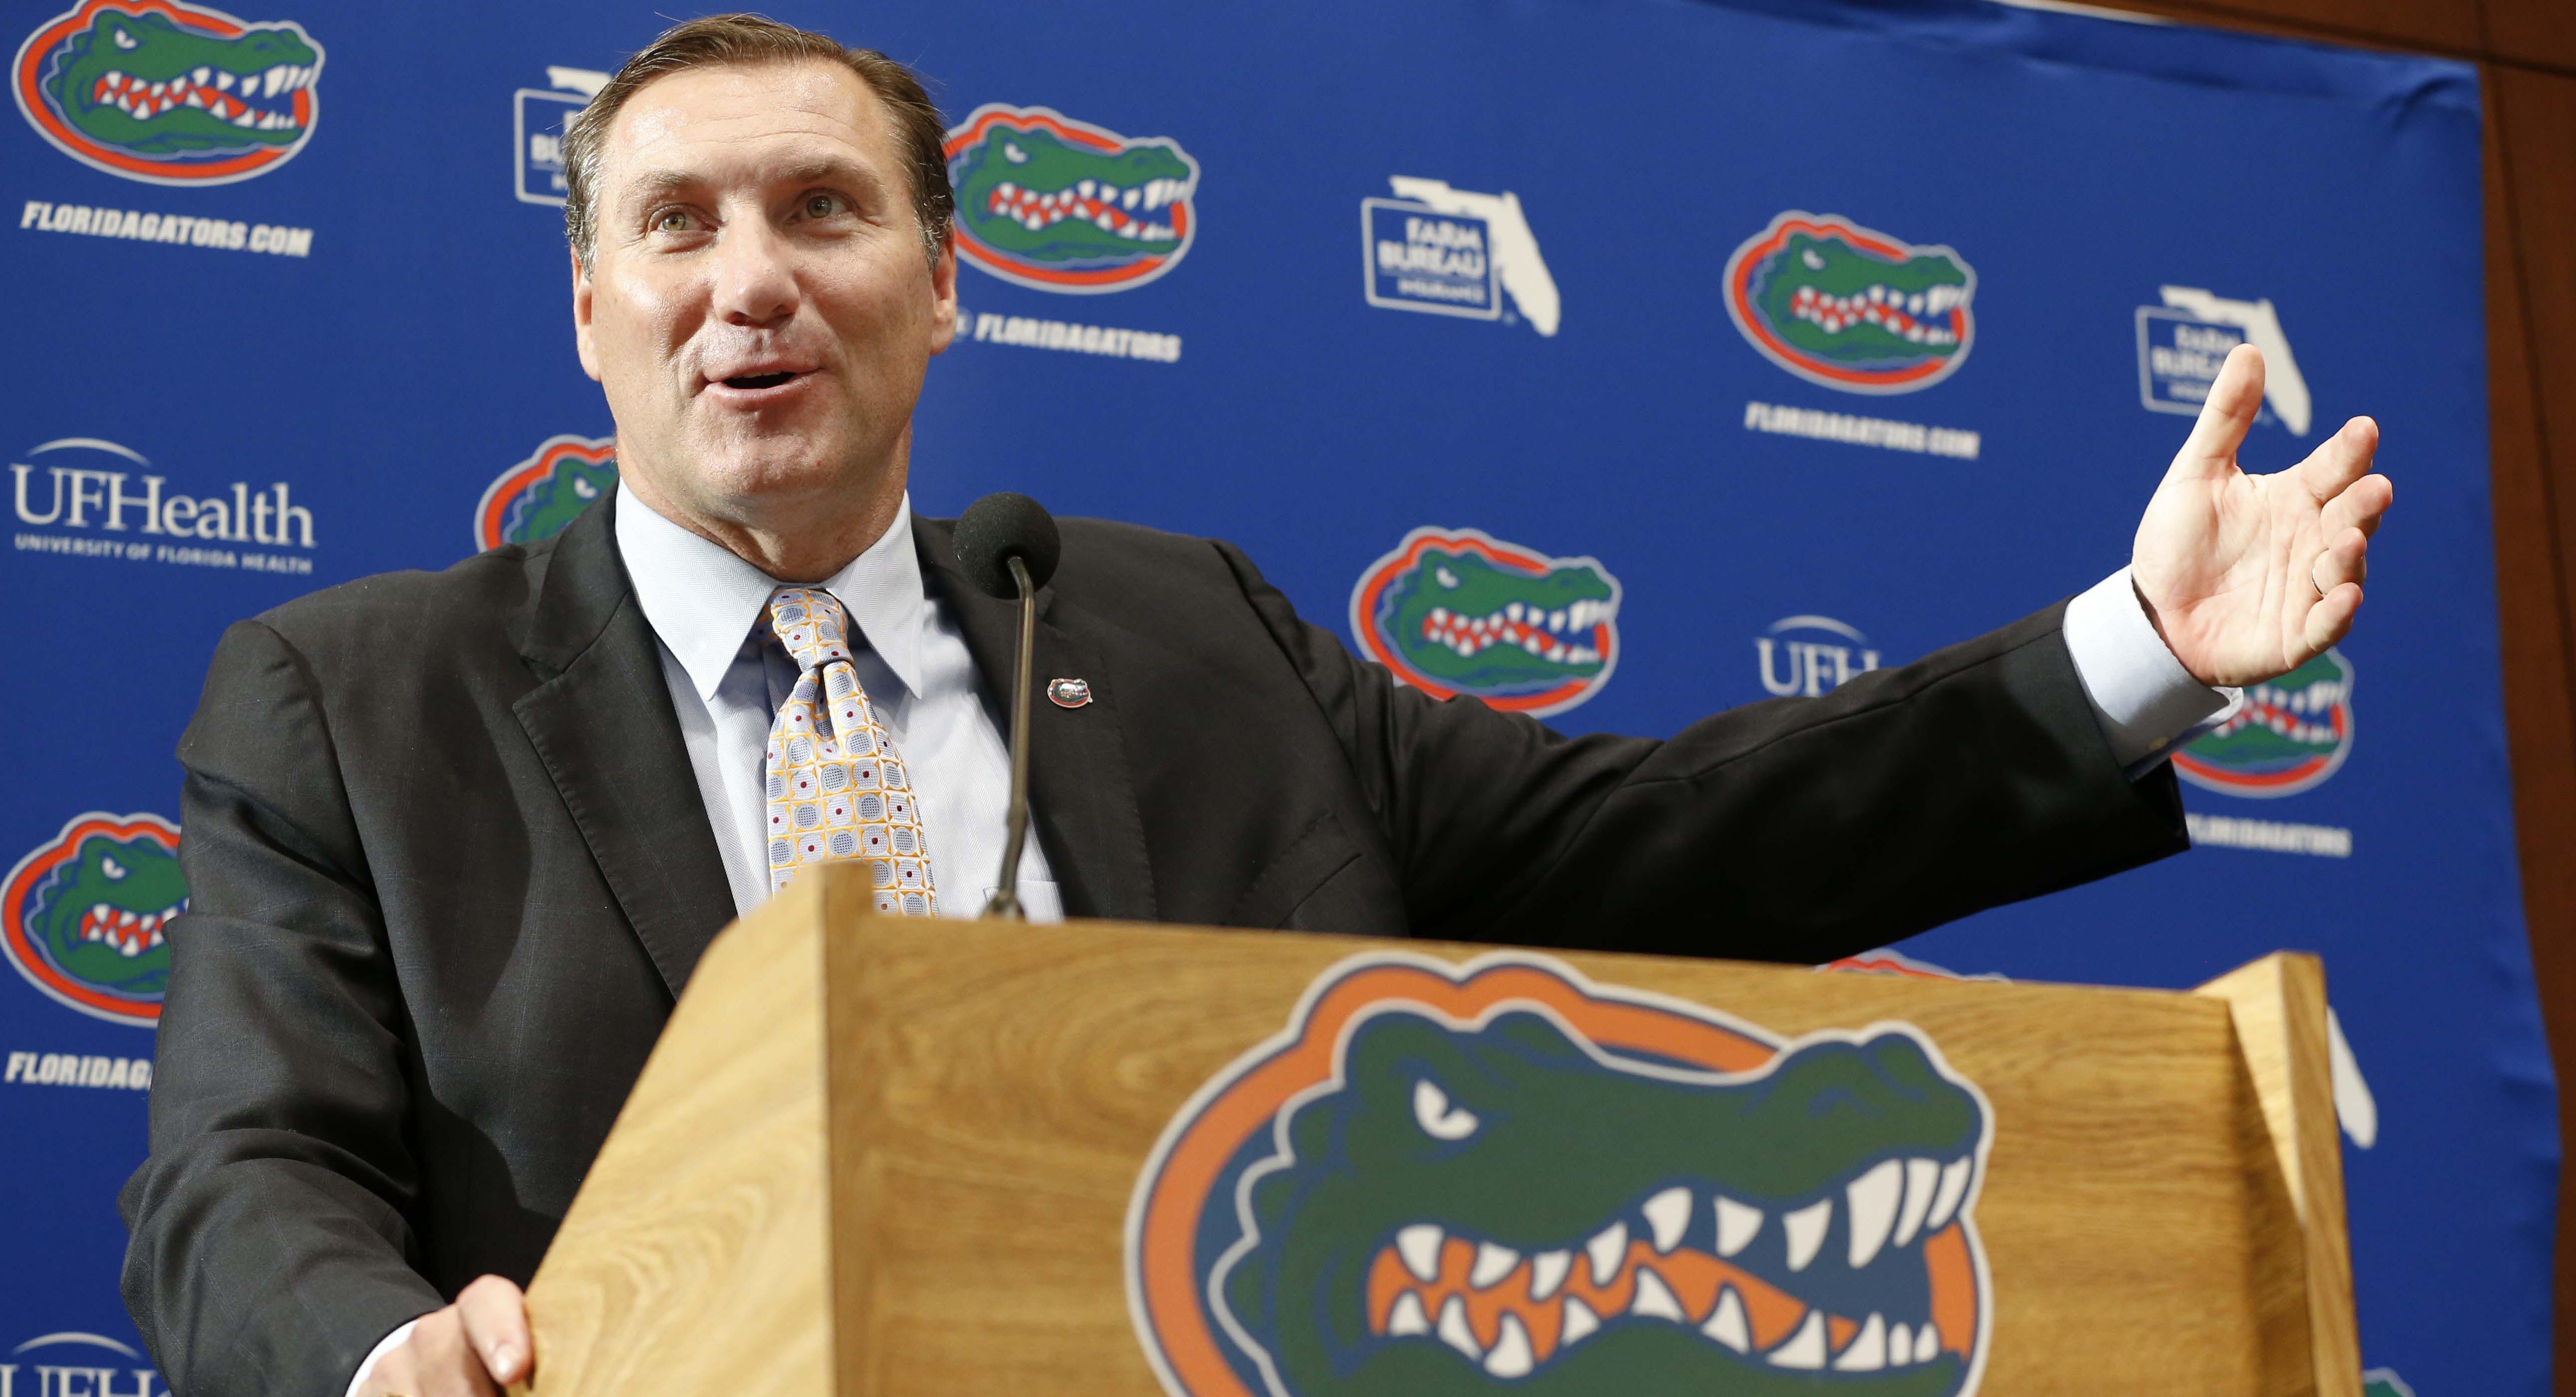 Gator Football Hosts Several Key Recruits This Weekend As Signing Day